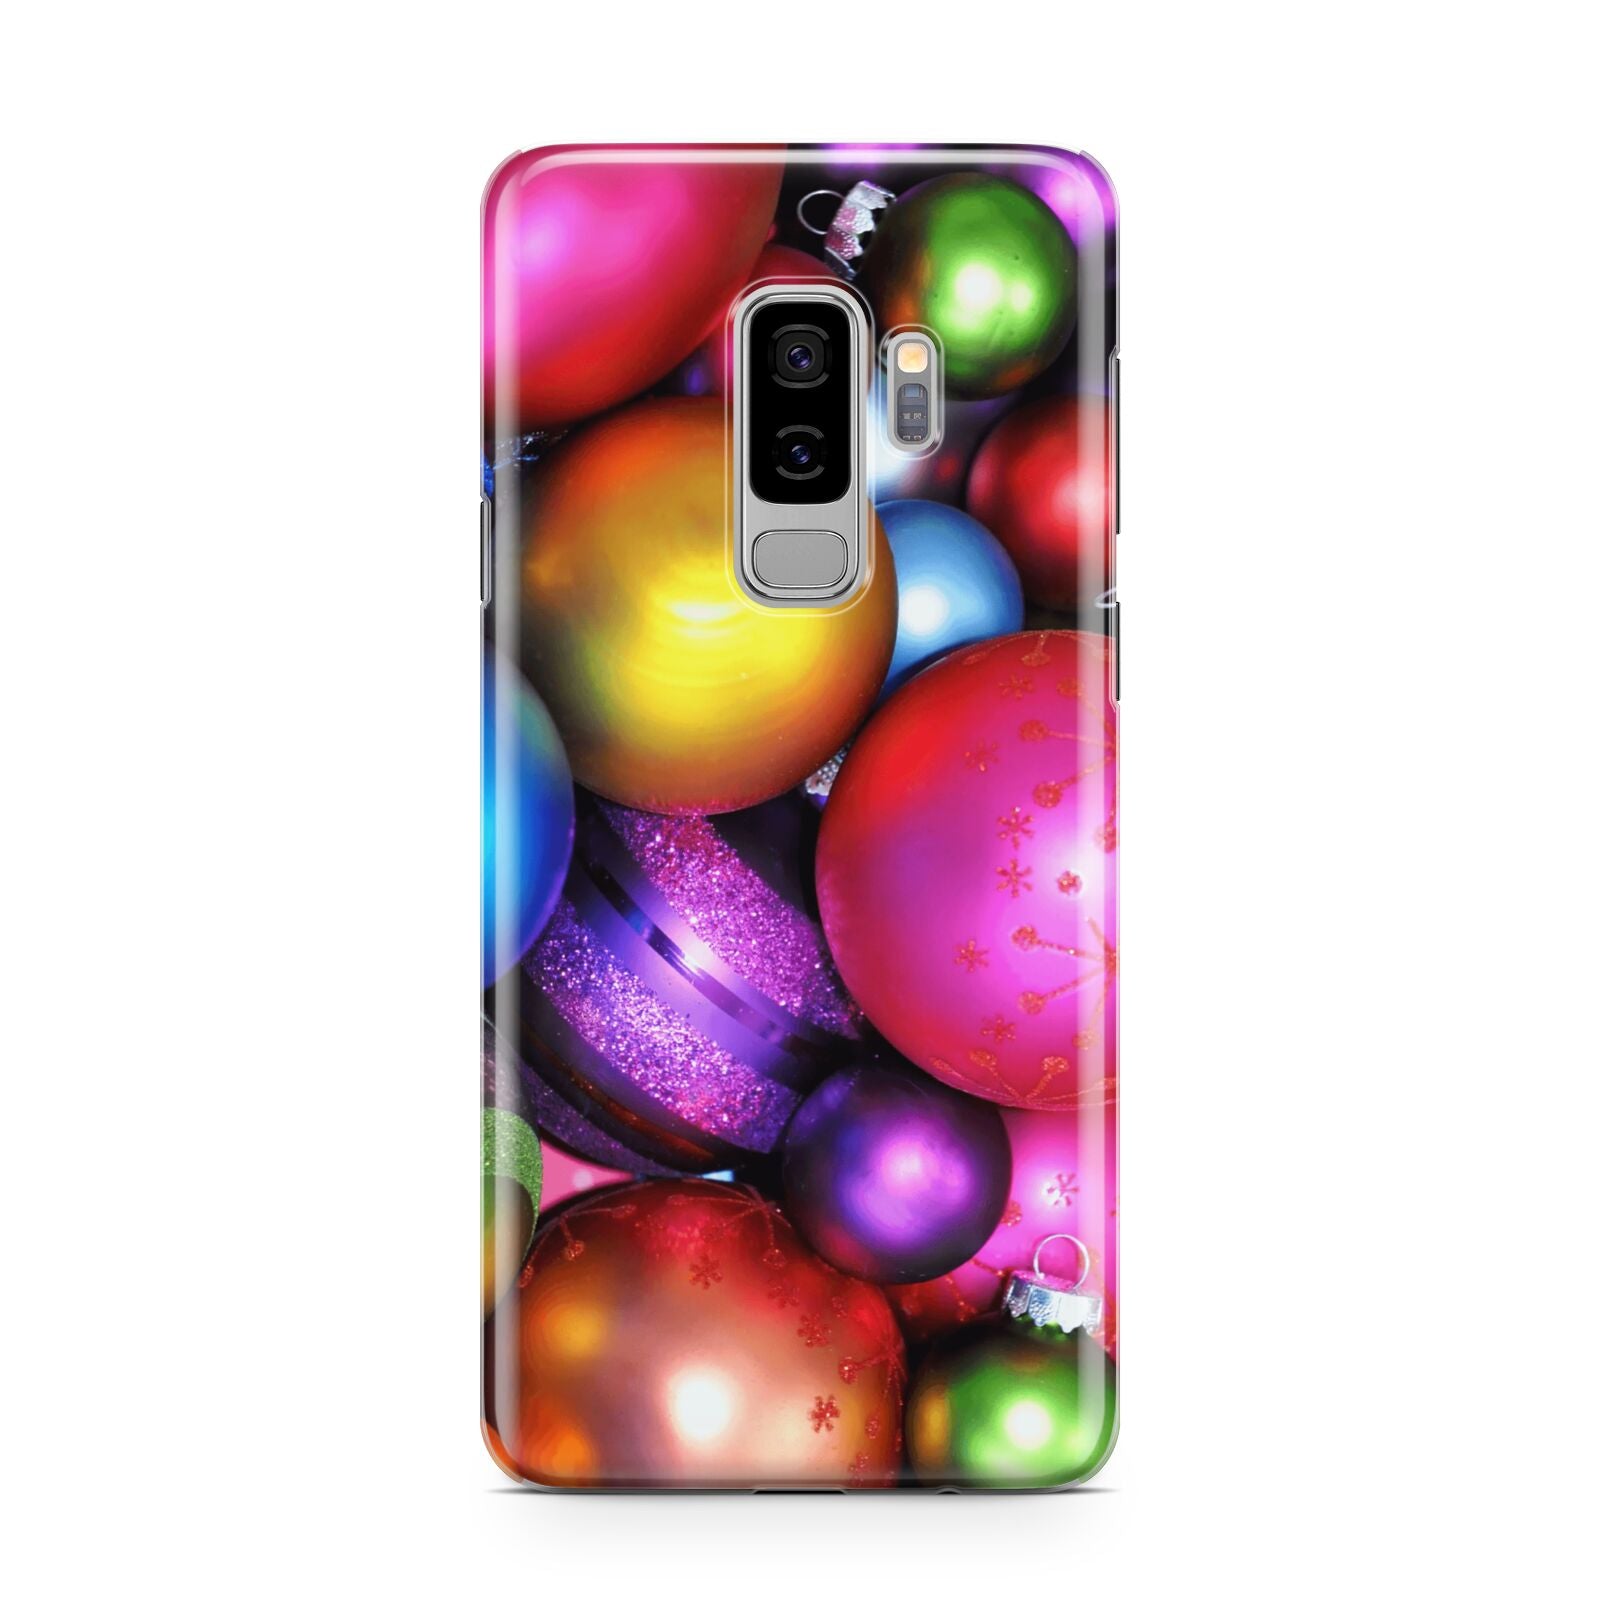 Bauble Samsung Galaxy S9 Plus Case on Silver phone